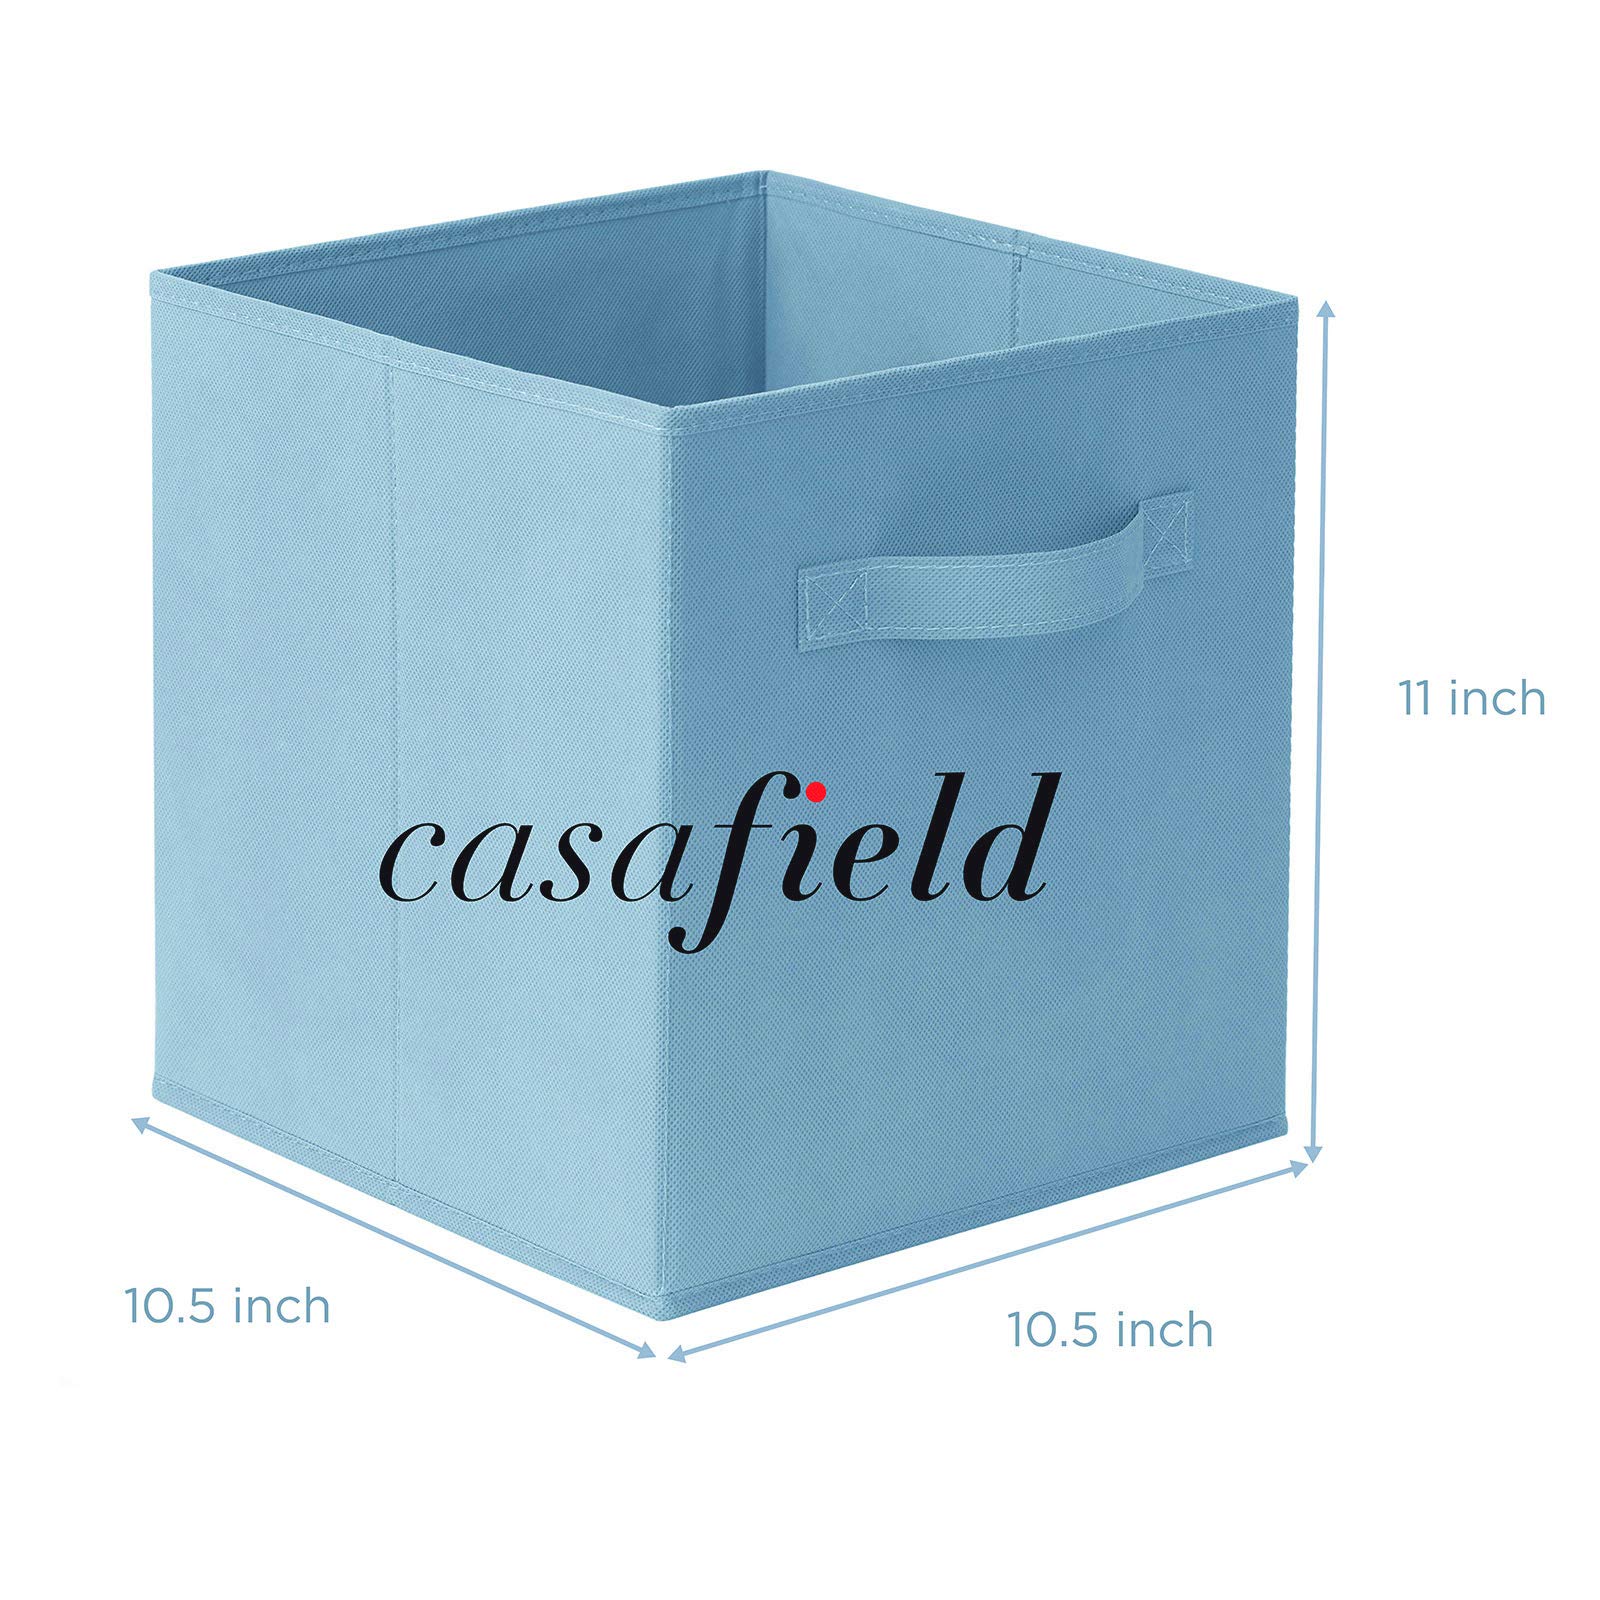 Casafield Set of 6 Collapsible Fabric Cube Storage Bins, Baby Blue - 11" Foldable Cloth Baskets for Shelves, Cubby Organizers & More